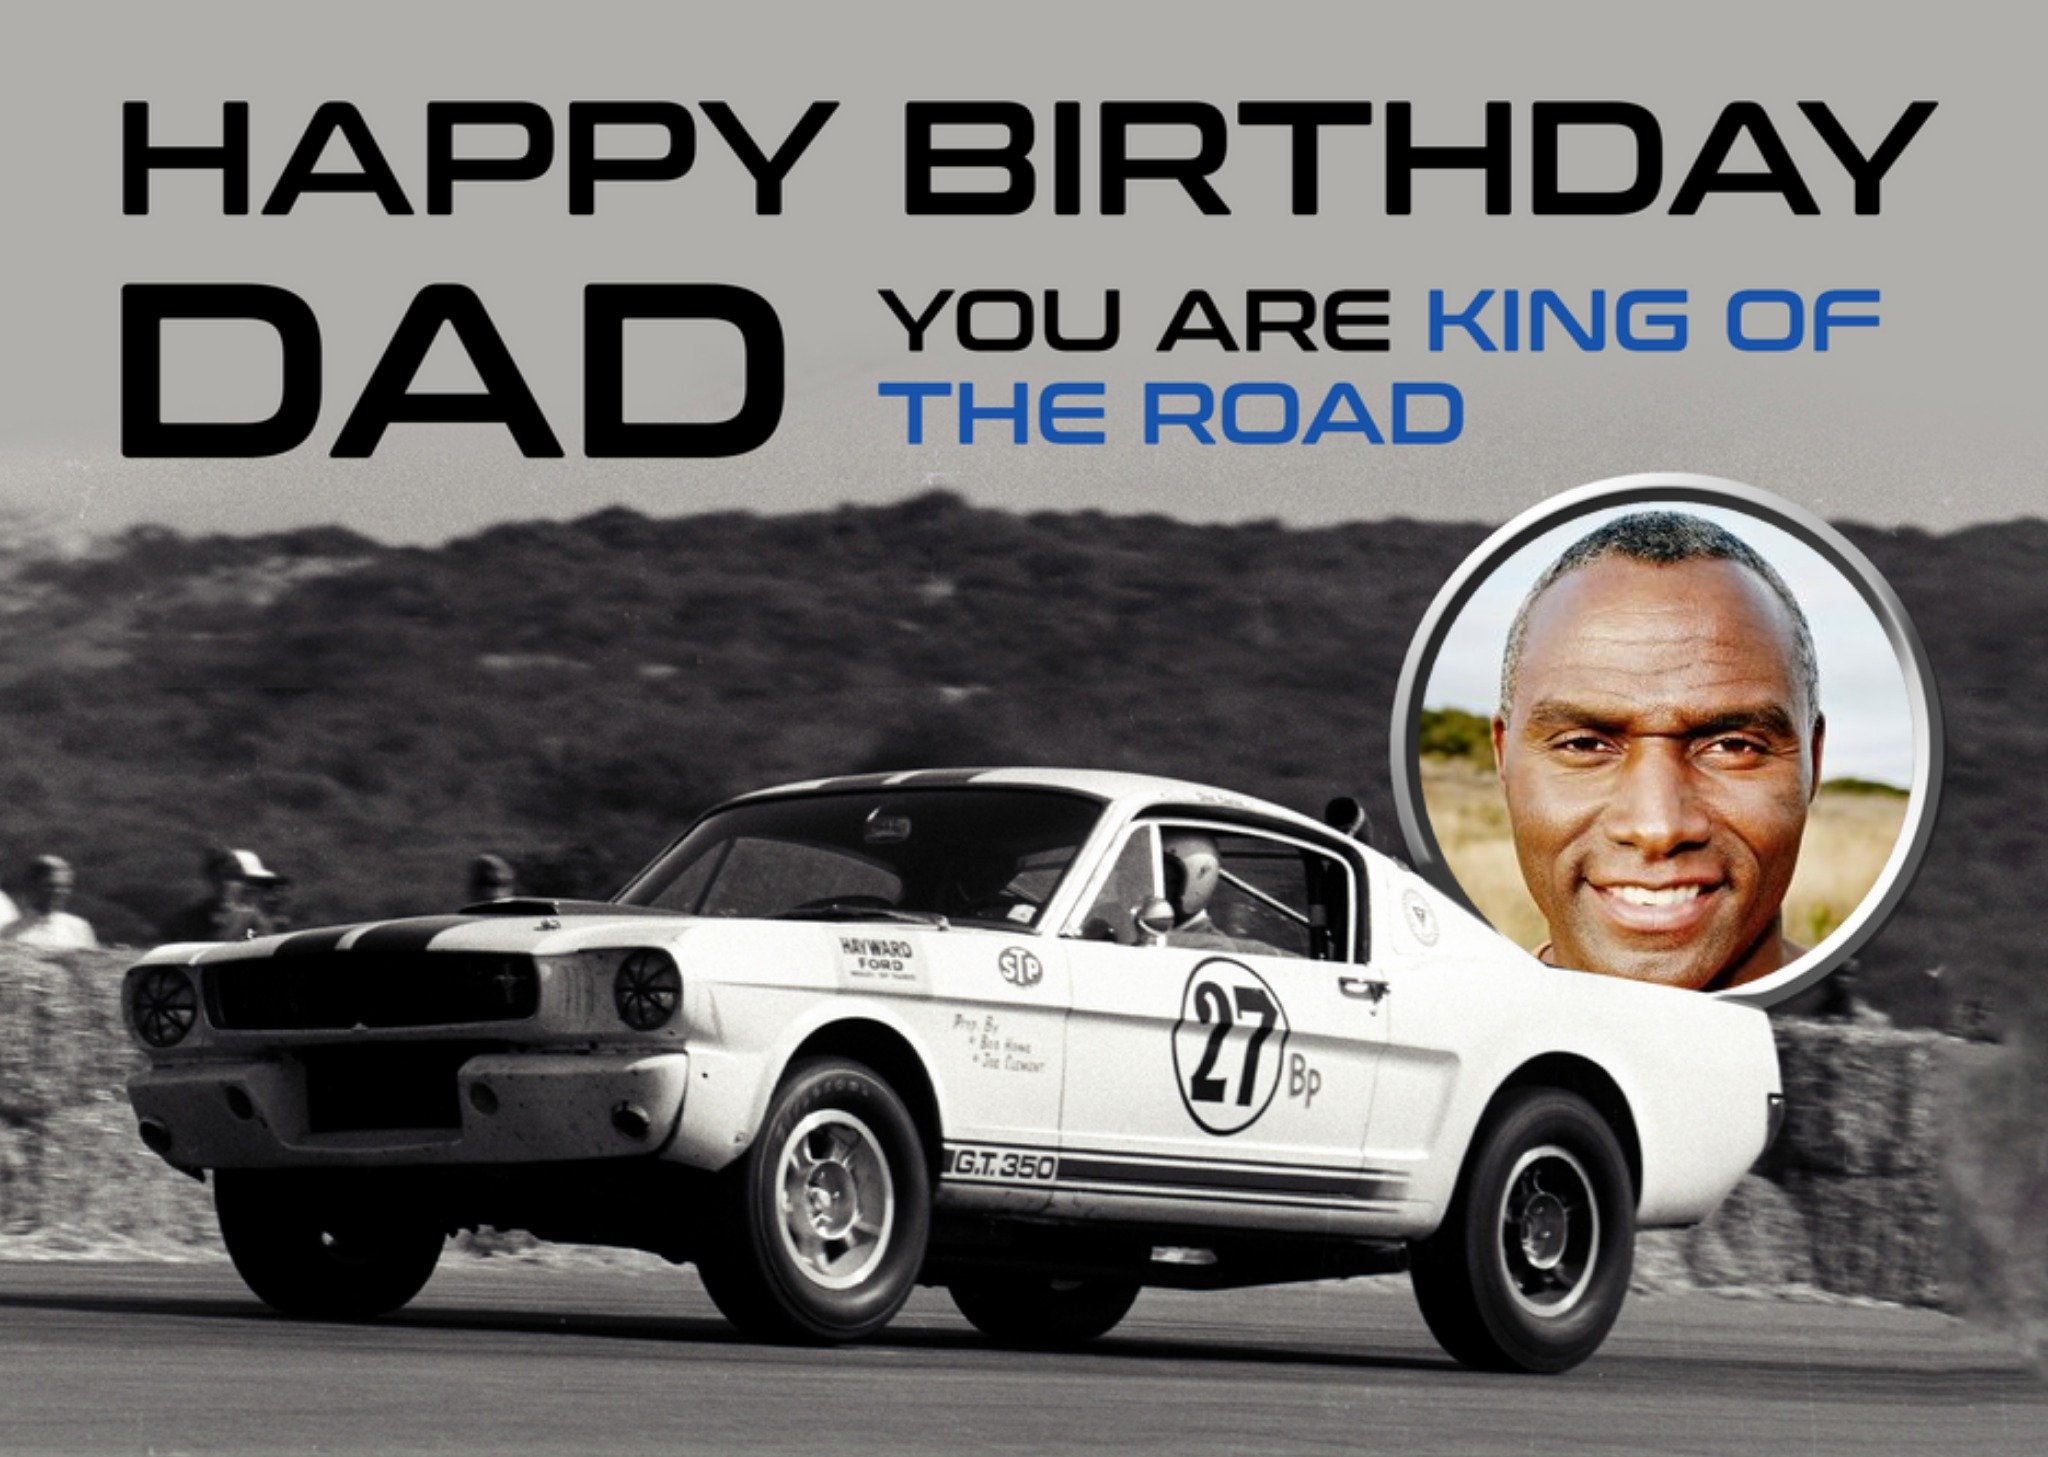 Moonpig Shelby Dad King Of The Road Photo Upload Birthday Card, Large